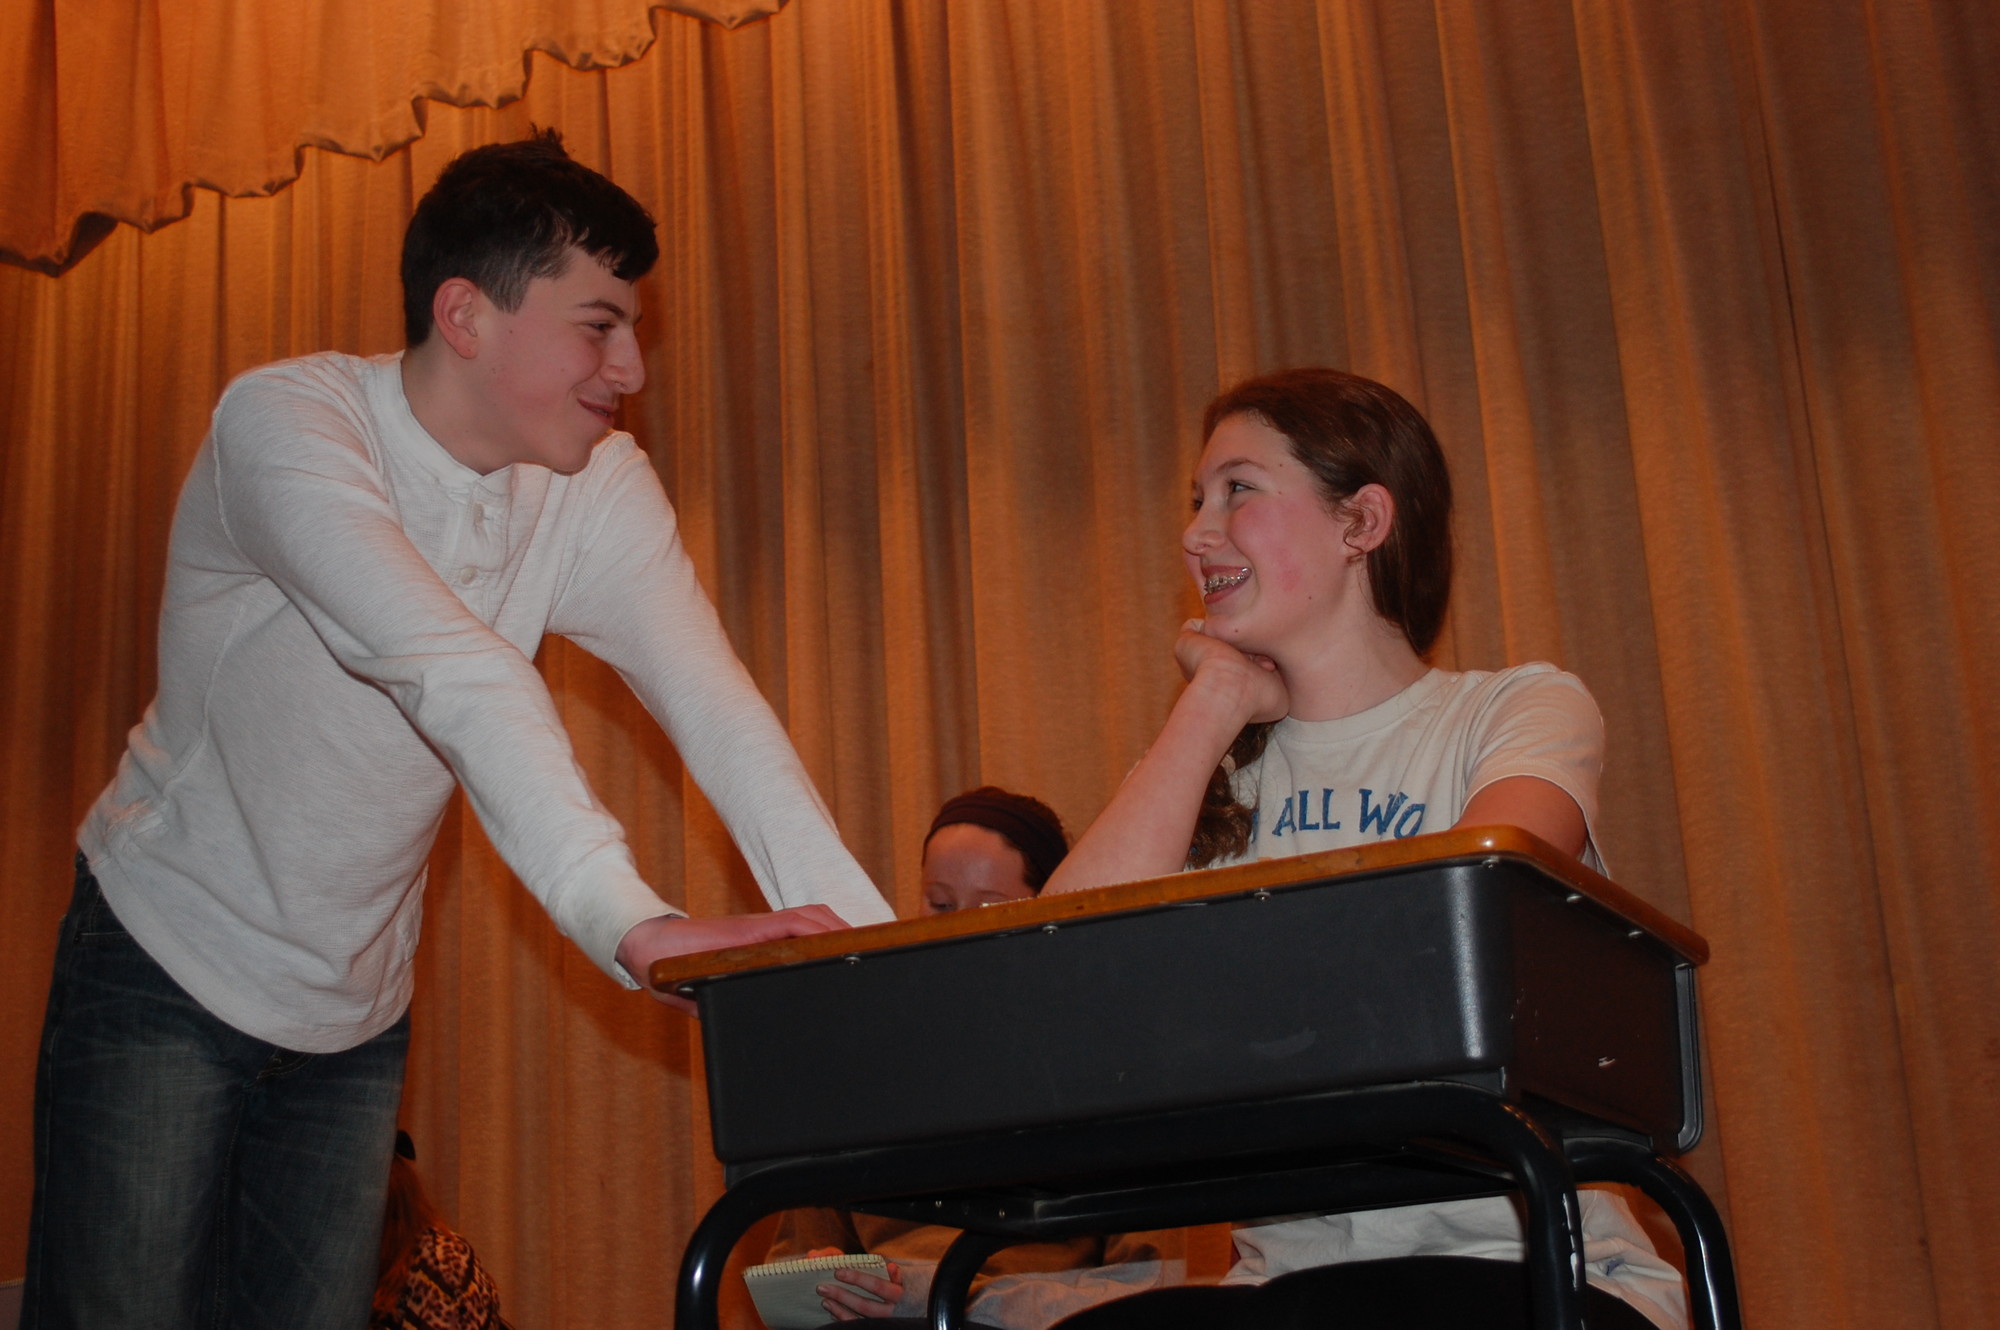 Daniel Cantanno and Mary Kate Kiley play the lead roles of Jimmy Smith and Millie Dillmount.